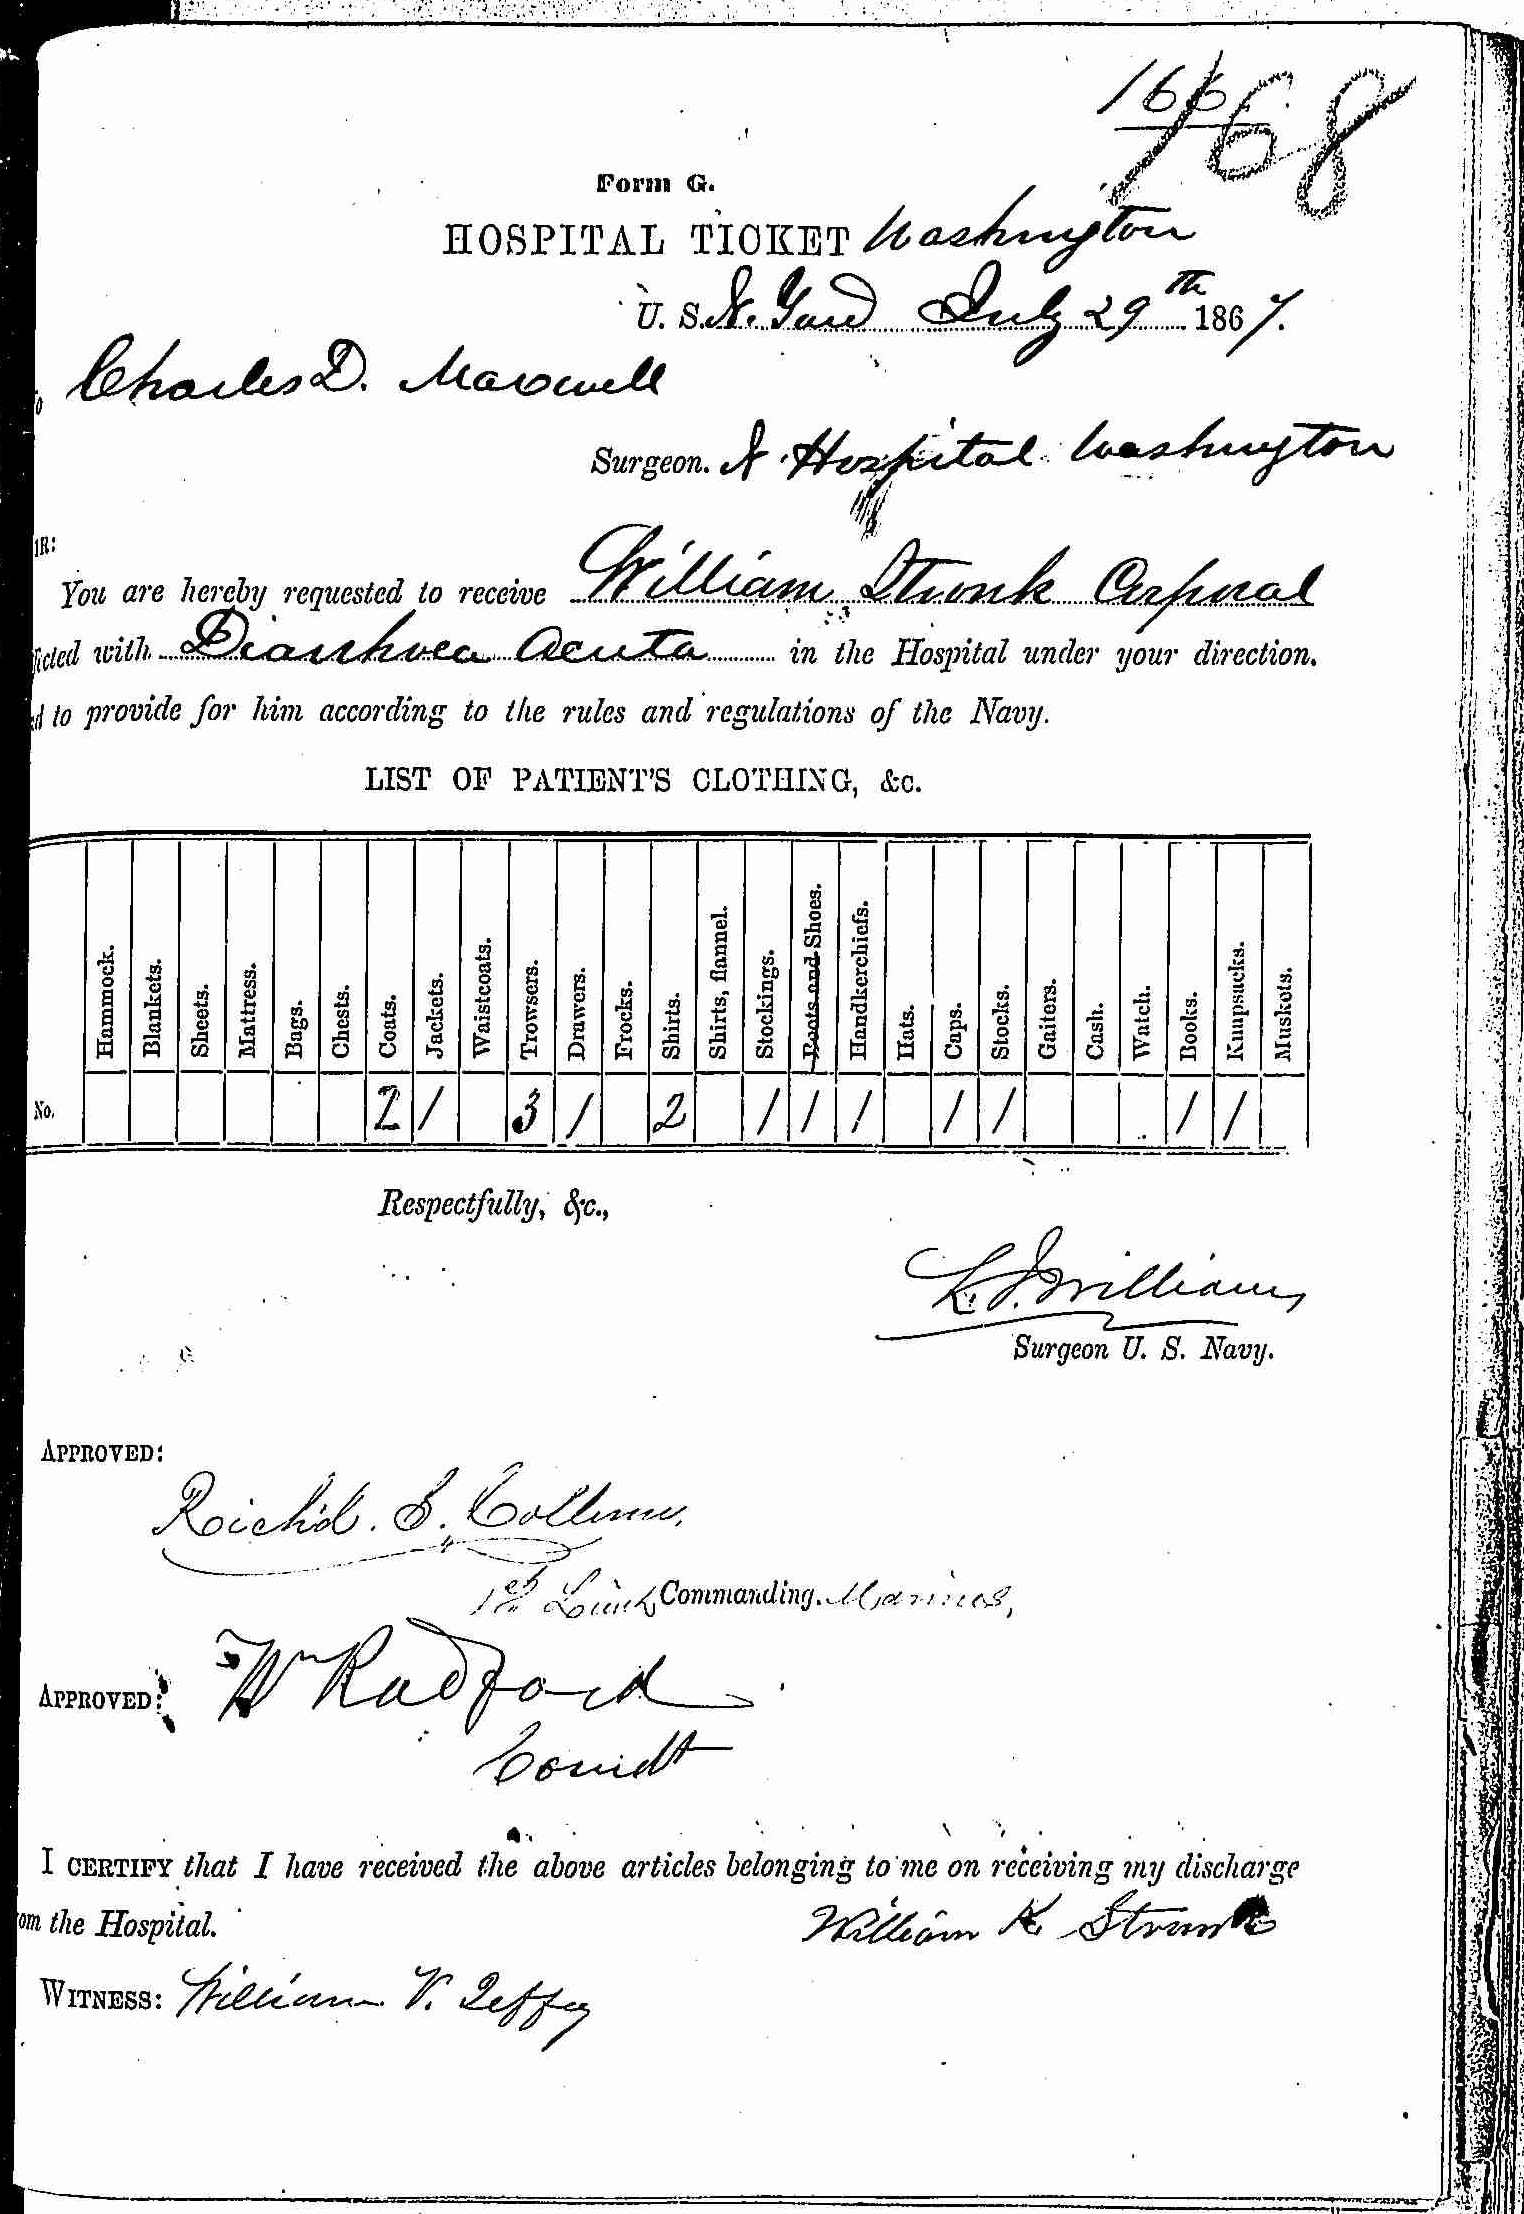 Entry for William Stonk (page 1 of 2) in the log Hospital Tickets and Case Papers - Naval Hospital - Washington, D.C. - 1866-68